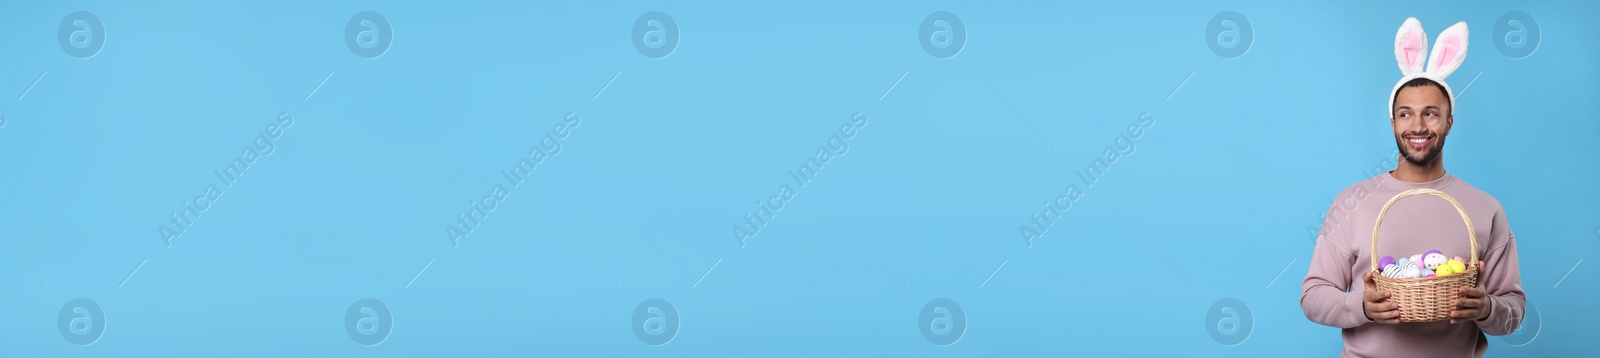 Image of Man with bunny ears holding basket full of Easter eggs on light blue background, space for text. Banner design